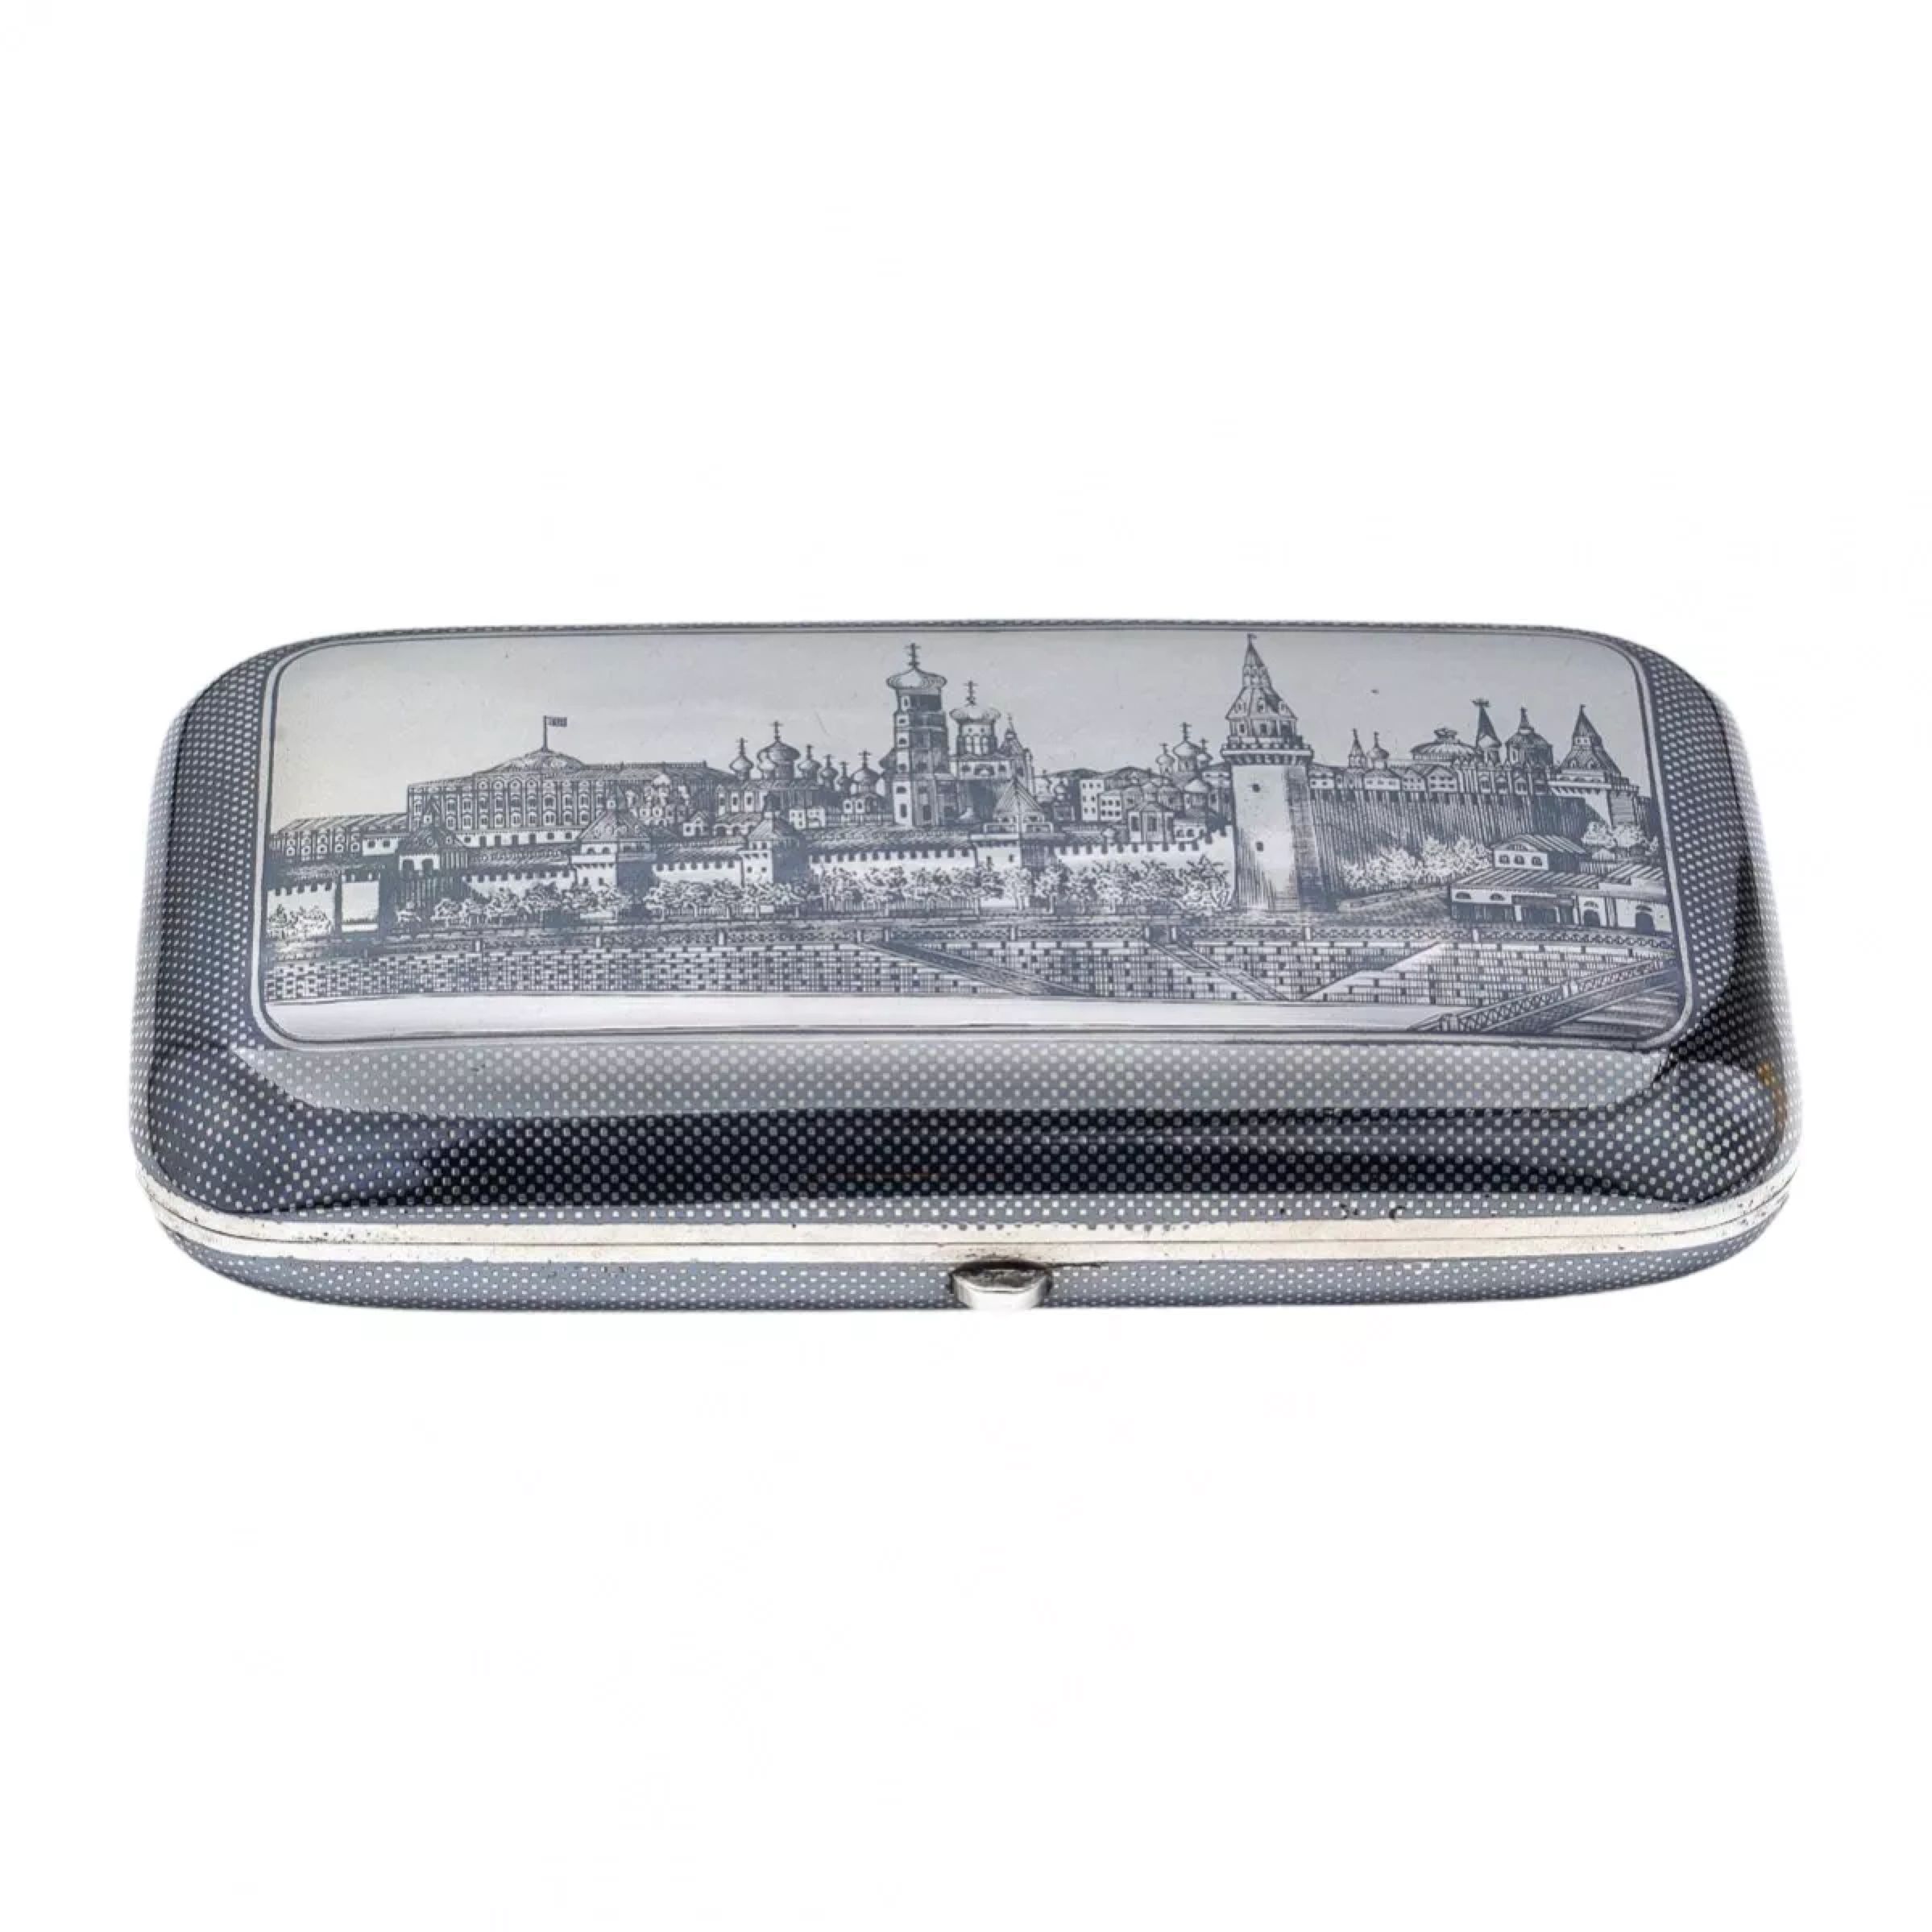 Russian-silver-cigarette-case-of-the-19th-century-with-a-blackened-panorama-of-the-Kremlin-